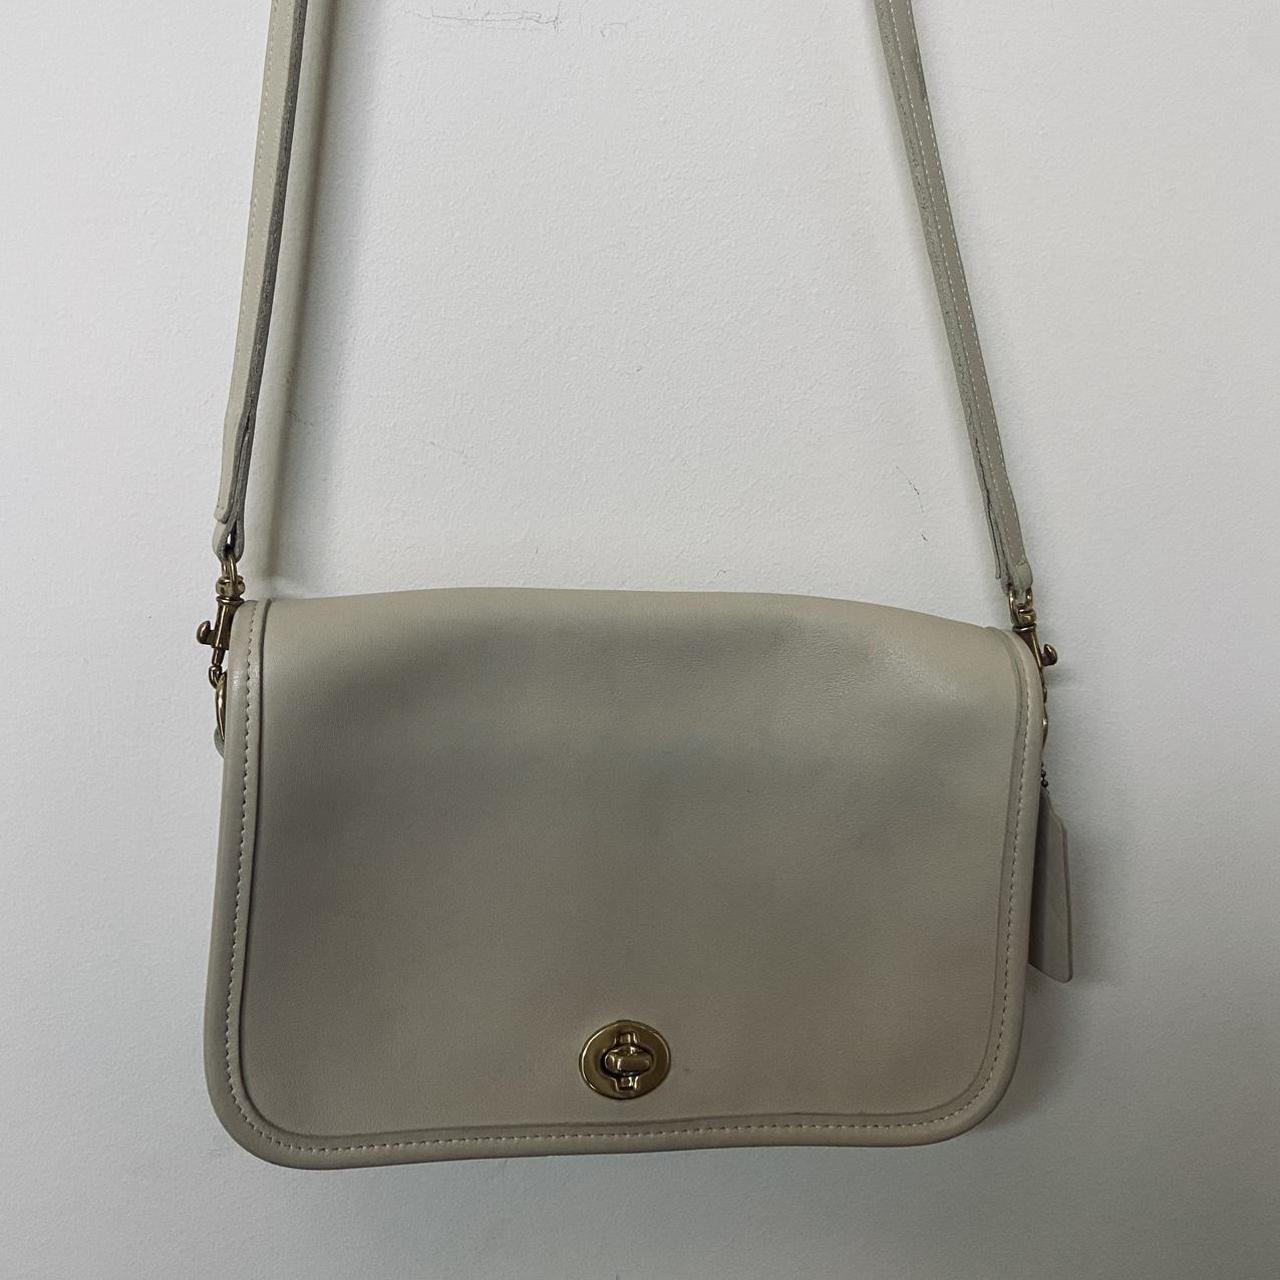 Vintage Coach Bag Penny Pocket in Ivory Leather Crossbody 